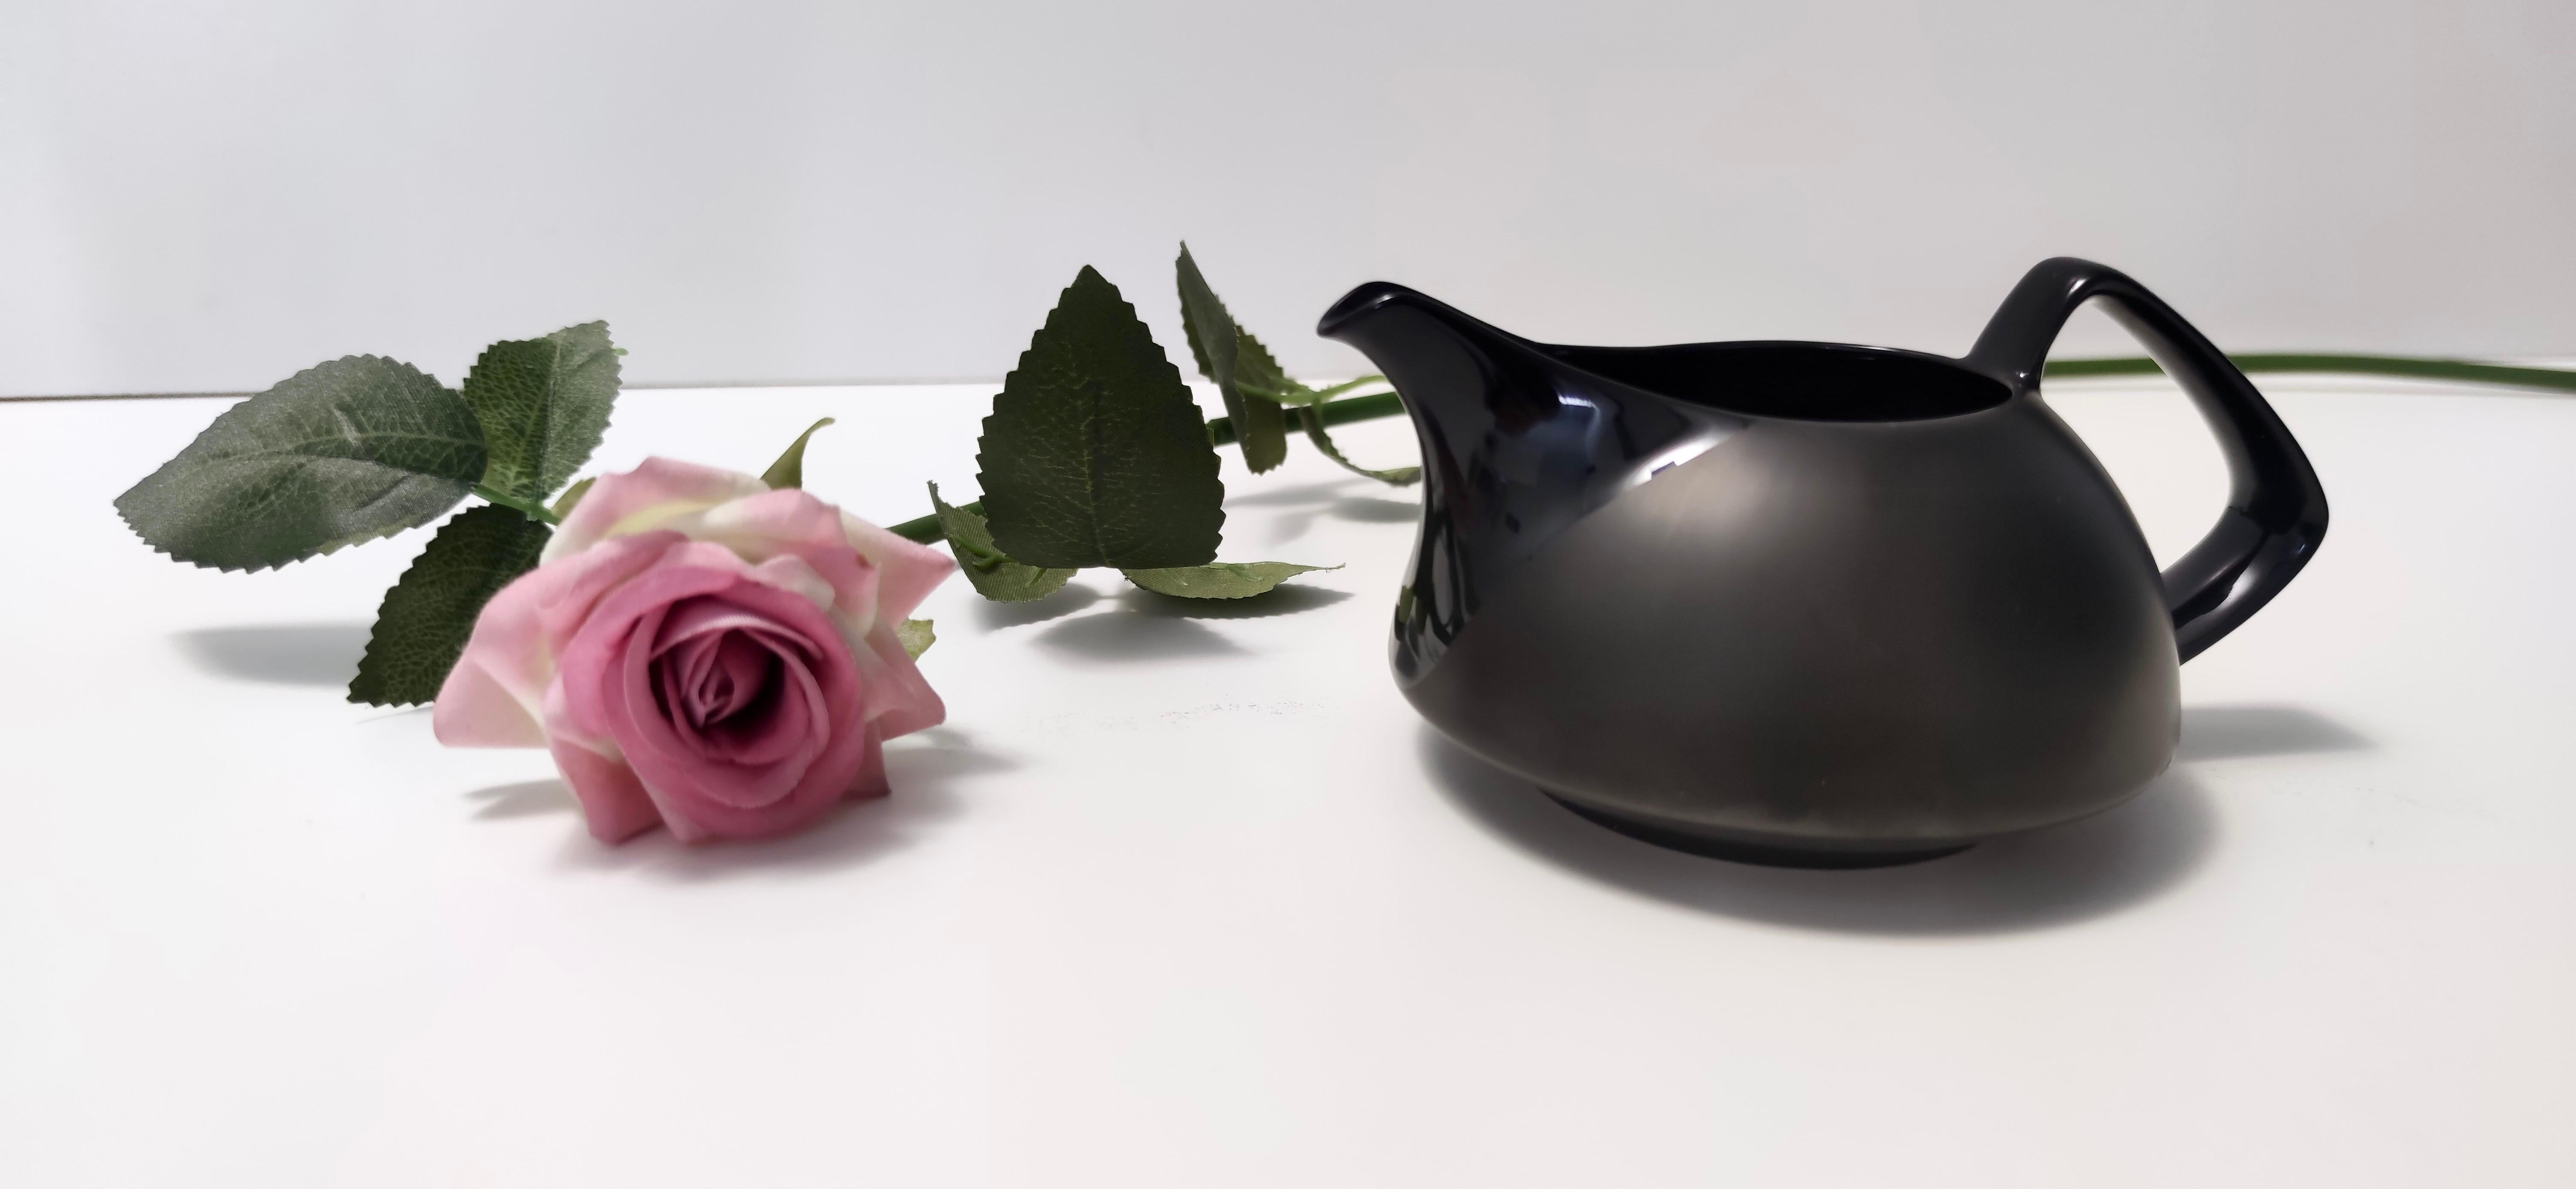 Made in Germany in 1969 by Walter Gropius for Rosenthal Studio Line. 
It is made in black porcelain with both a matte and glazed finish.
This milk jug is a vintage piece, therefore it might show slight traces of use but it can be considered as in